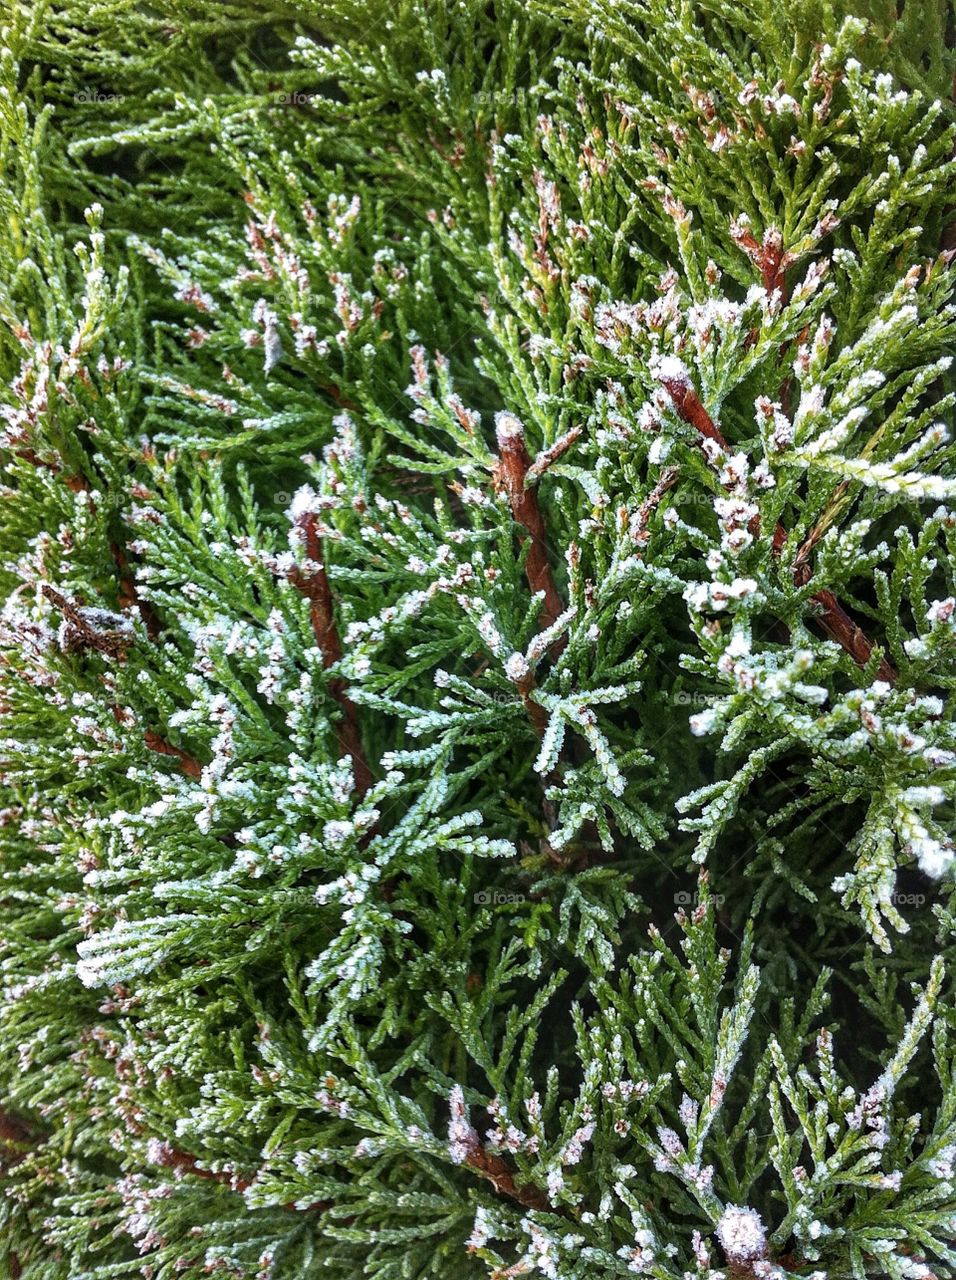 Frosty winter start! Frost covered conifers in the garden.